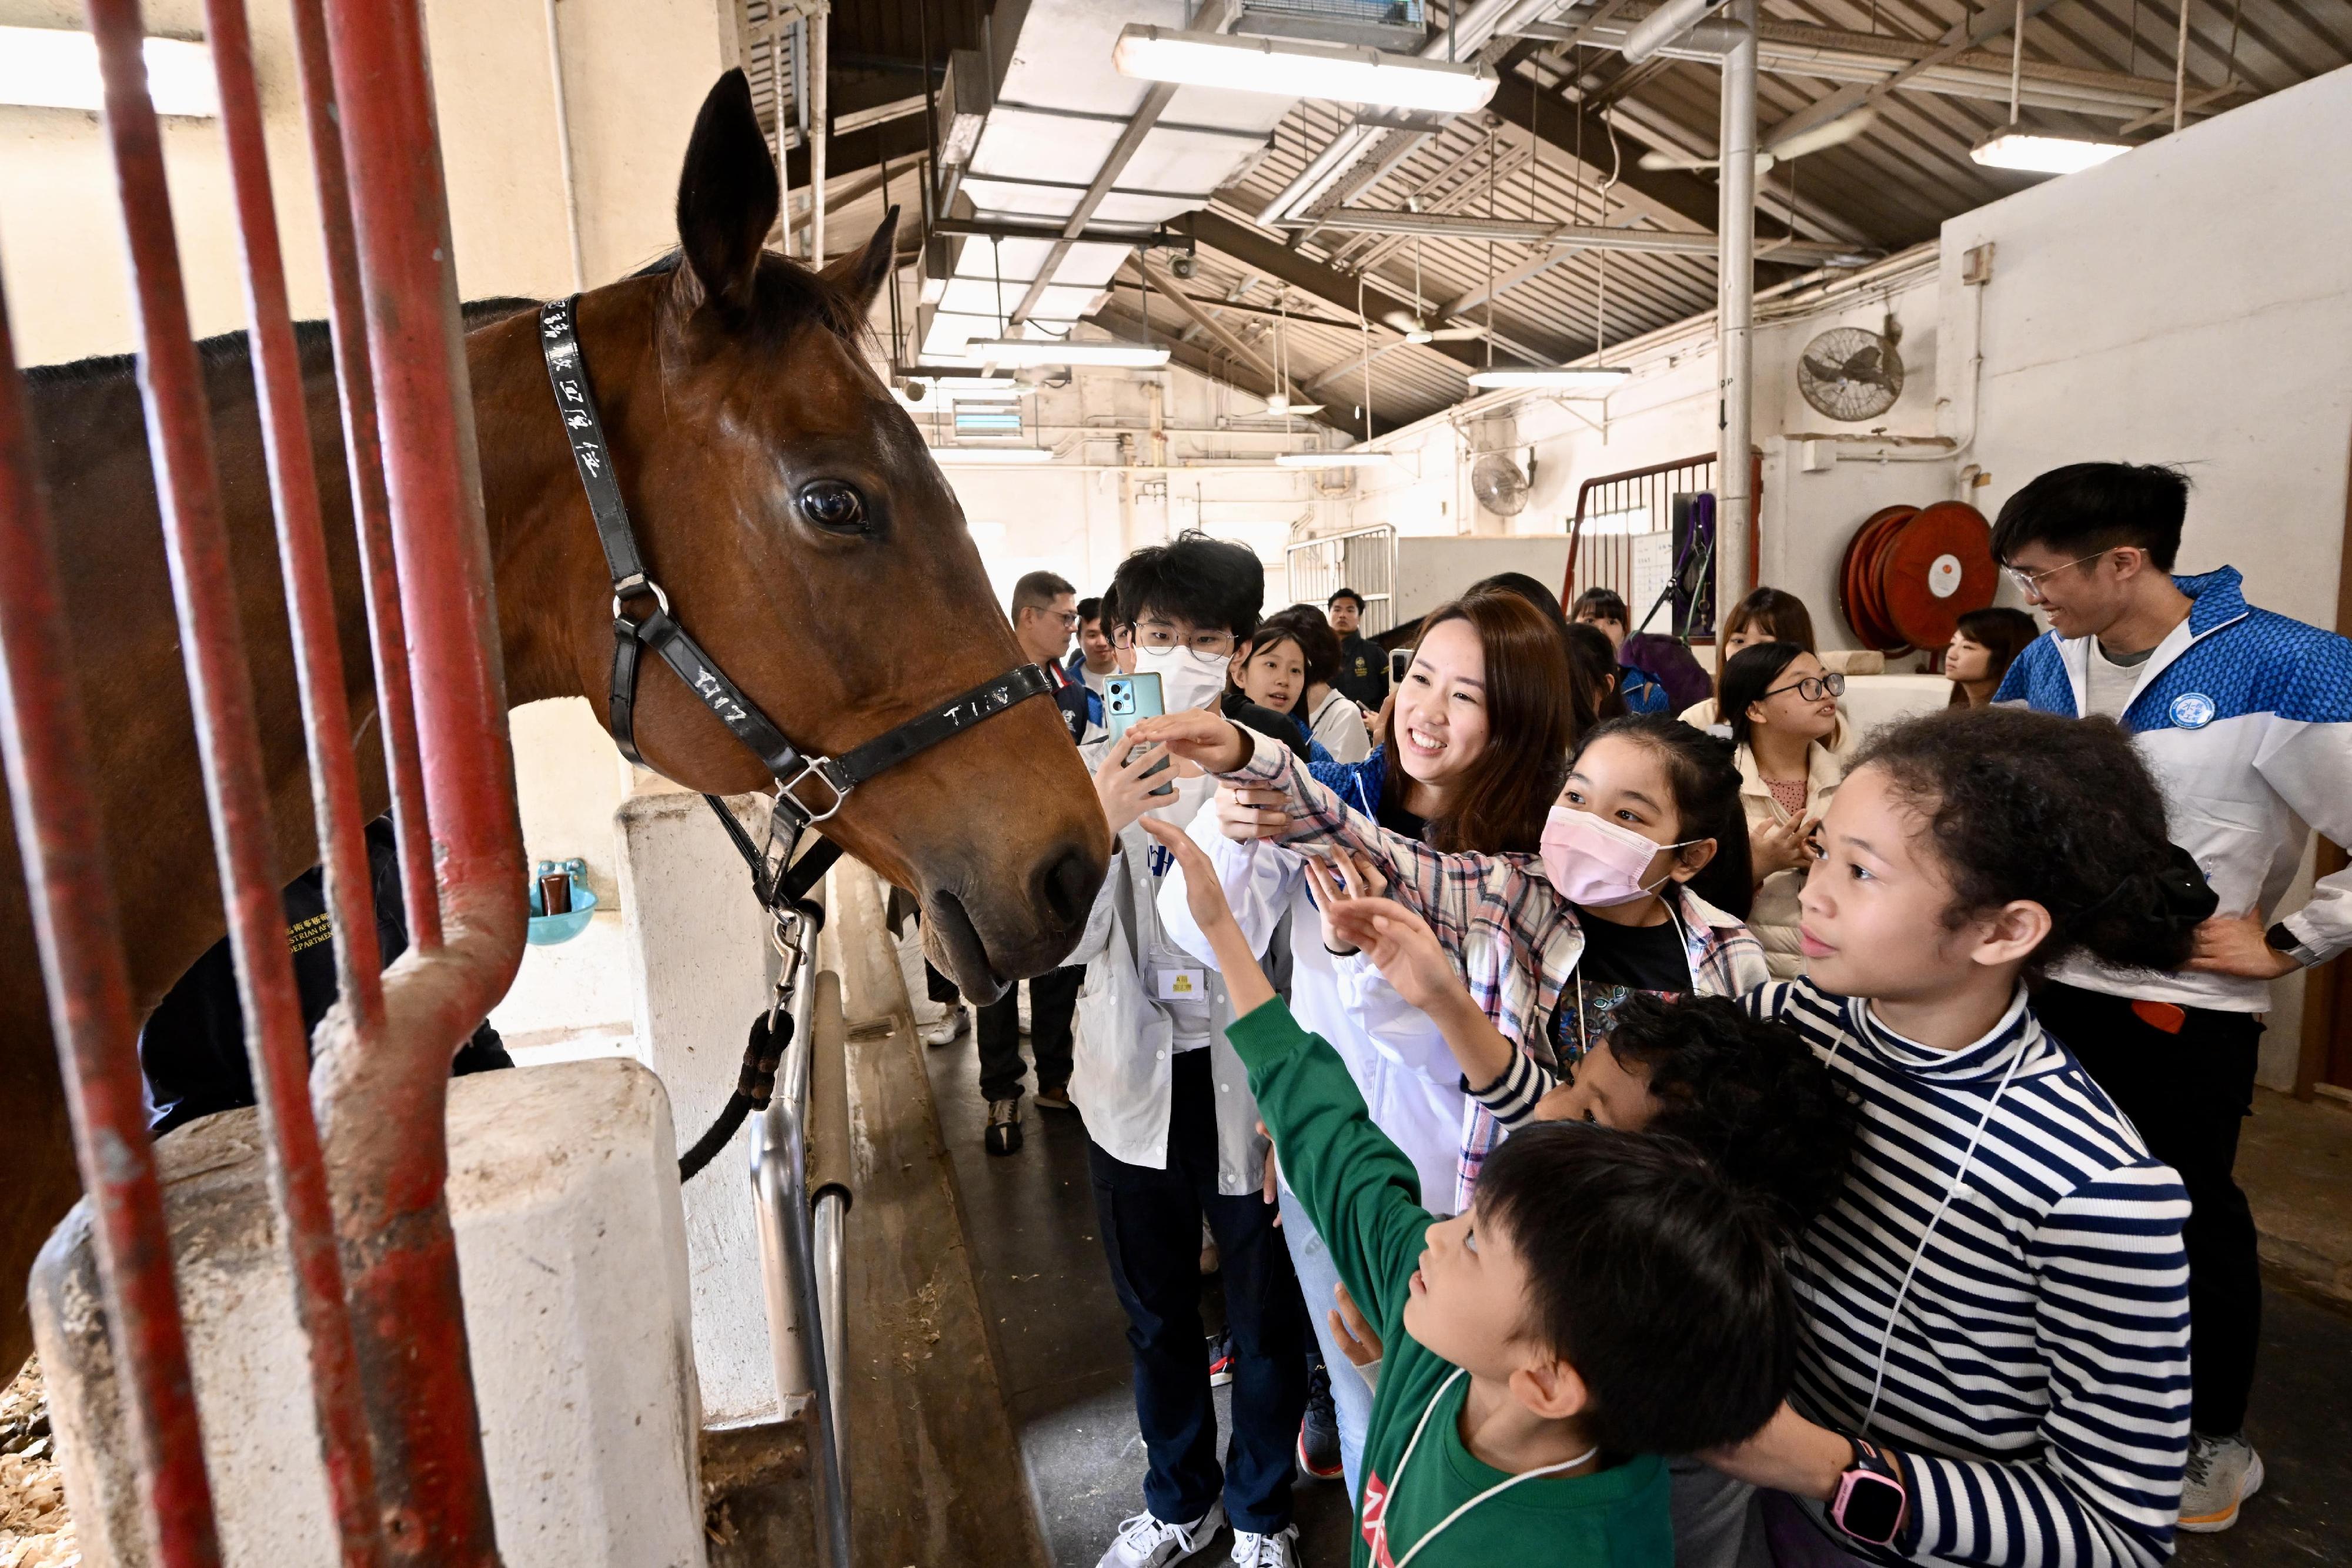 About 20 children from grassroots families today (January 20) visited the Tuen Mun Public Riding School in the company of civil service volunteers to learn about the environment of horses at the stables.